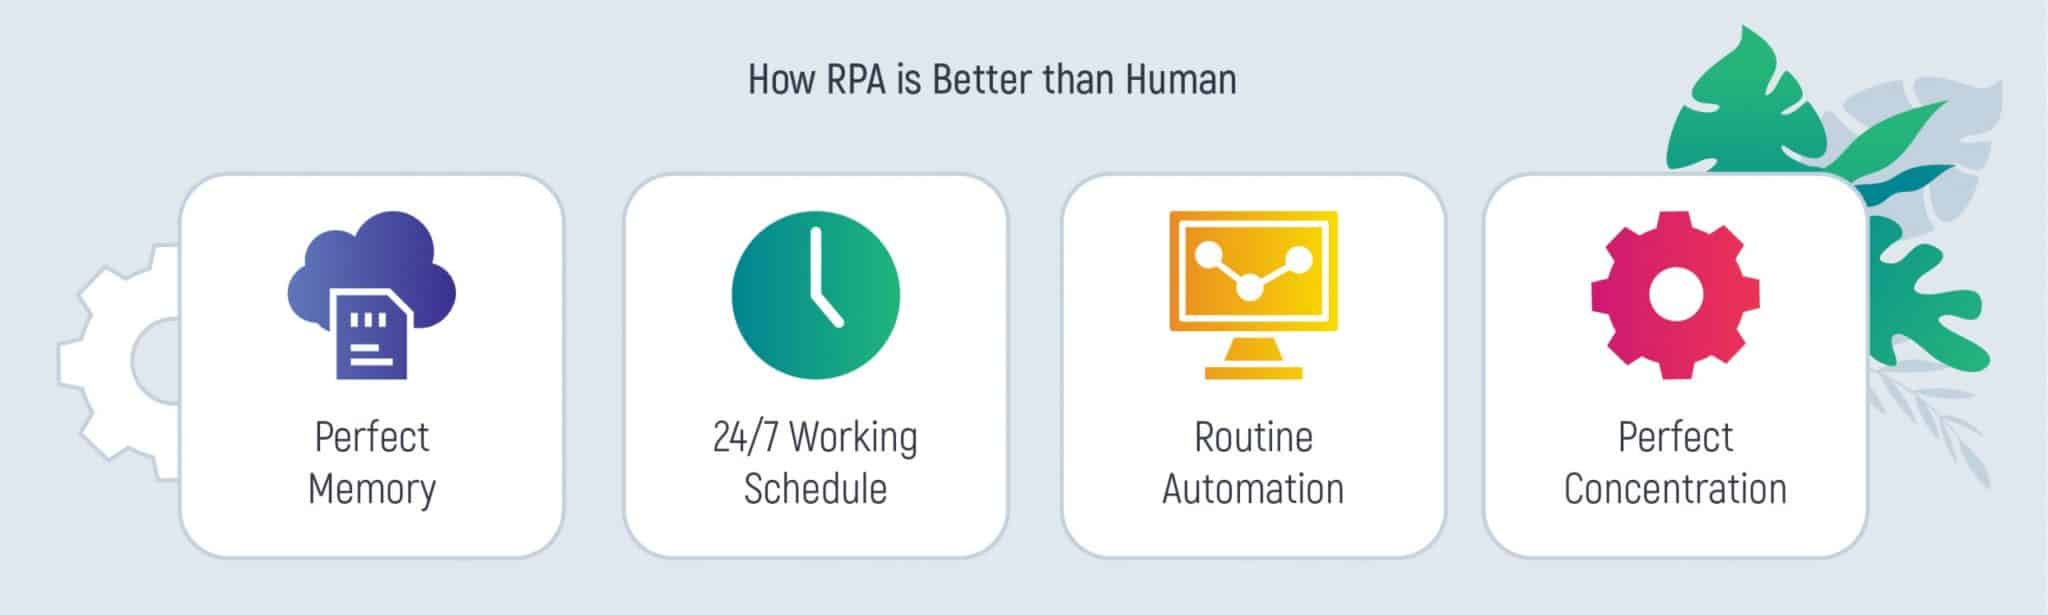 The benefits of RPA for finance and accounting